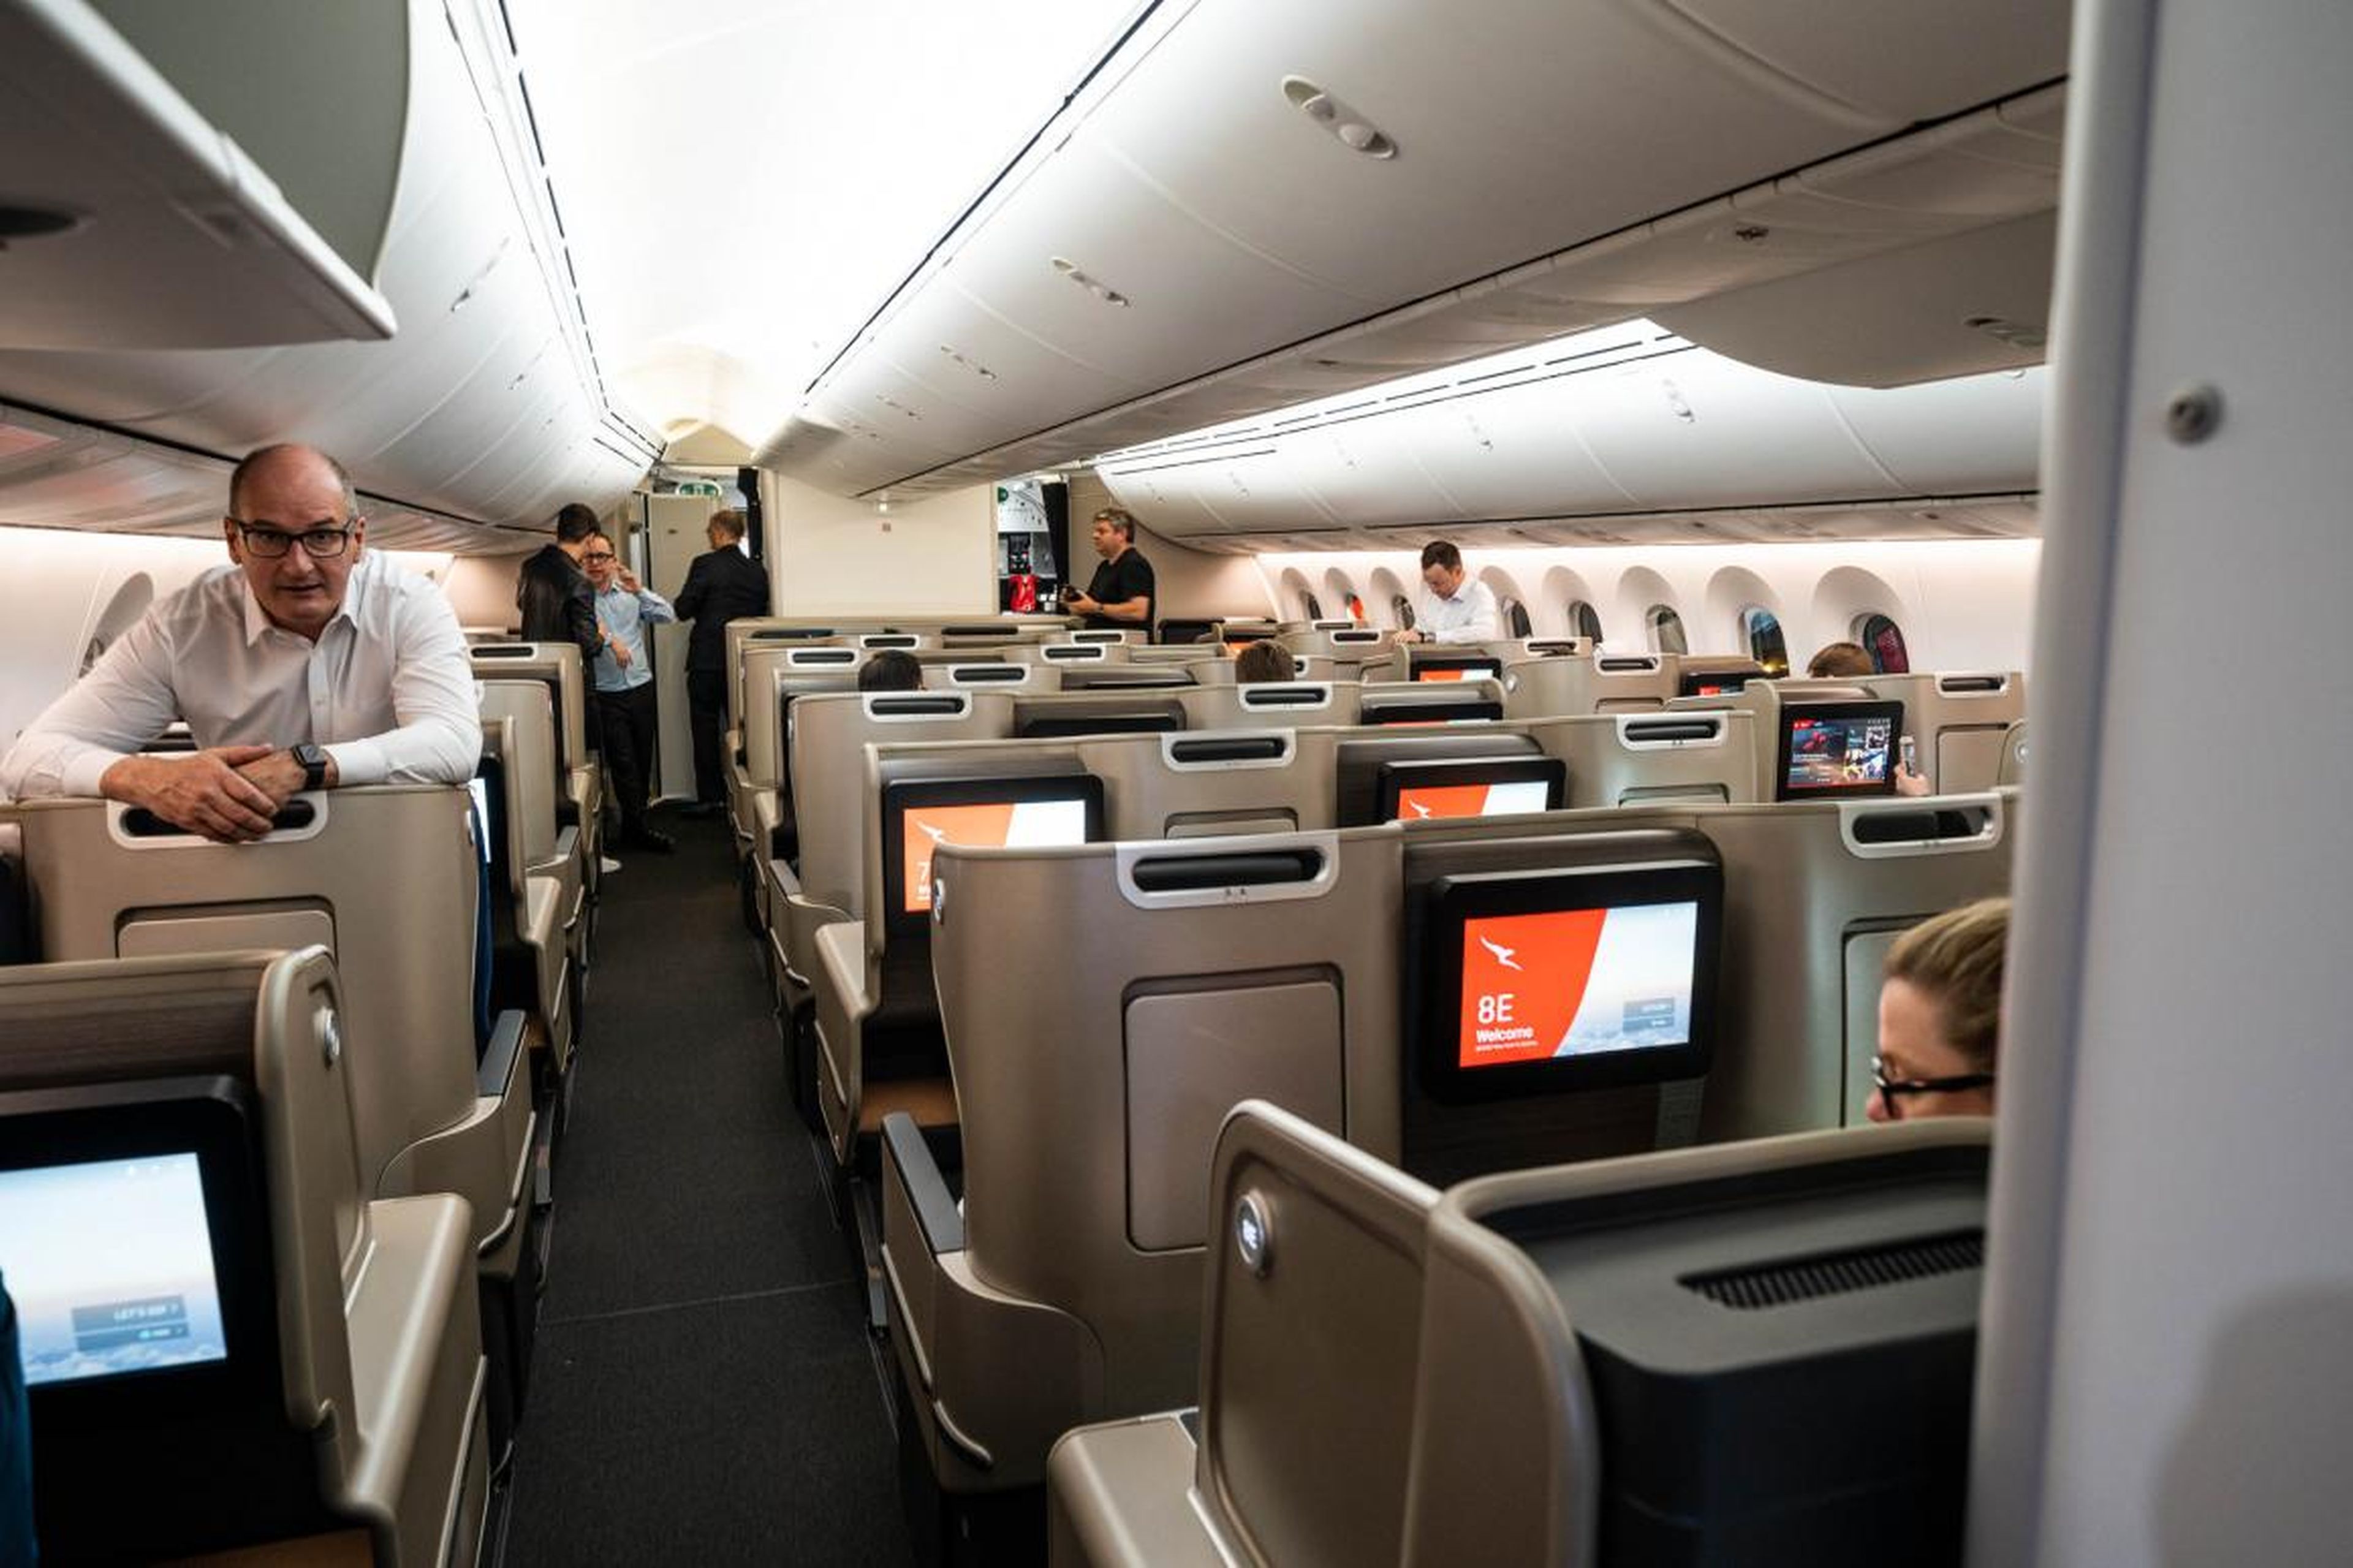 The business-class cabin on Qantas' 787-9s is split into two sections: a larger cabin to the left of the boarding door, and a smaller "mini cabin" with just three rows to the right. I was in the smaller cabin.